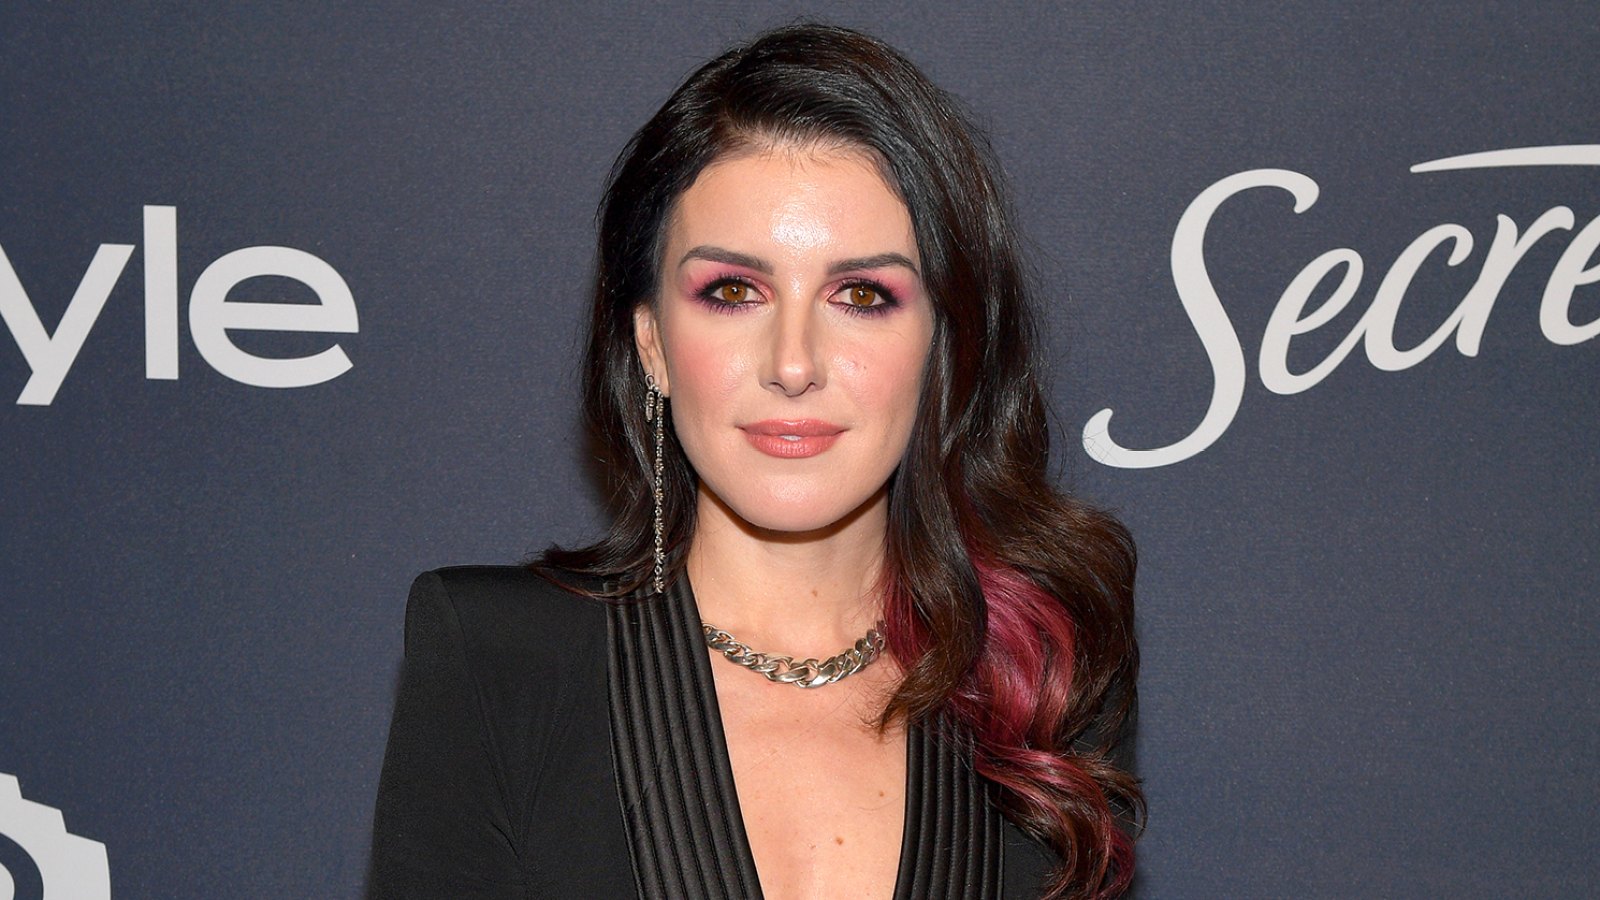 Shenae Grimes Addresses Comments About How She's 'Aged Terribly' Because She's Not Getting Botox